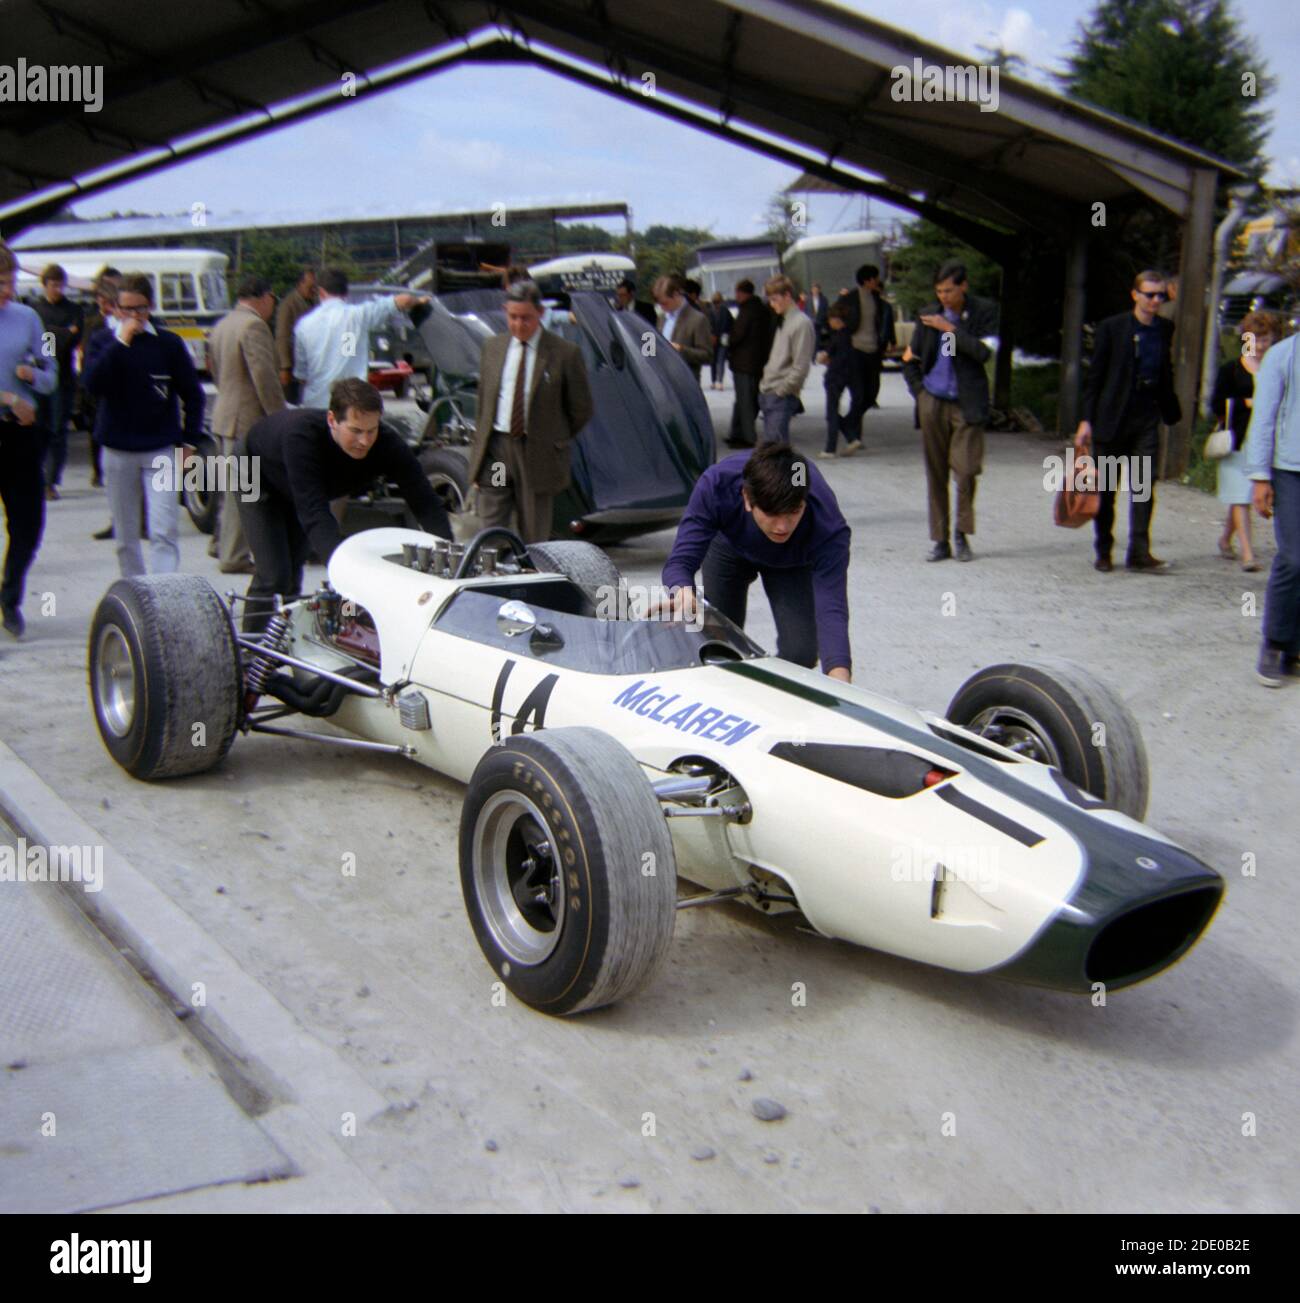 McLaren-Serenissima Formula 1 car in the paddock Brands Hatch Practice for the 1966 British Grand Prix, 15th July. Bruce McLaren retired after 78 laps Stock Photo